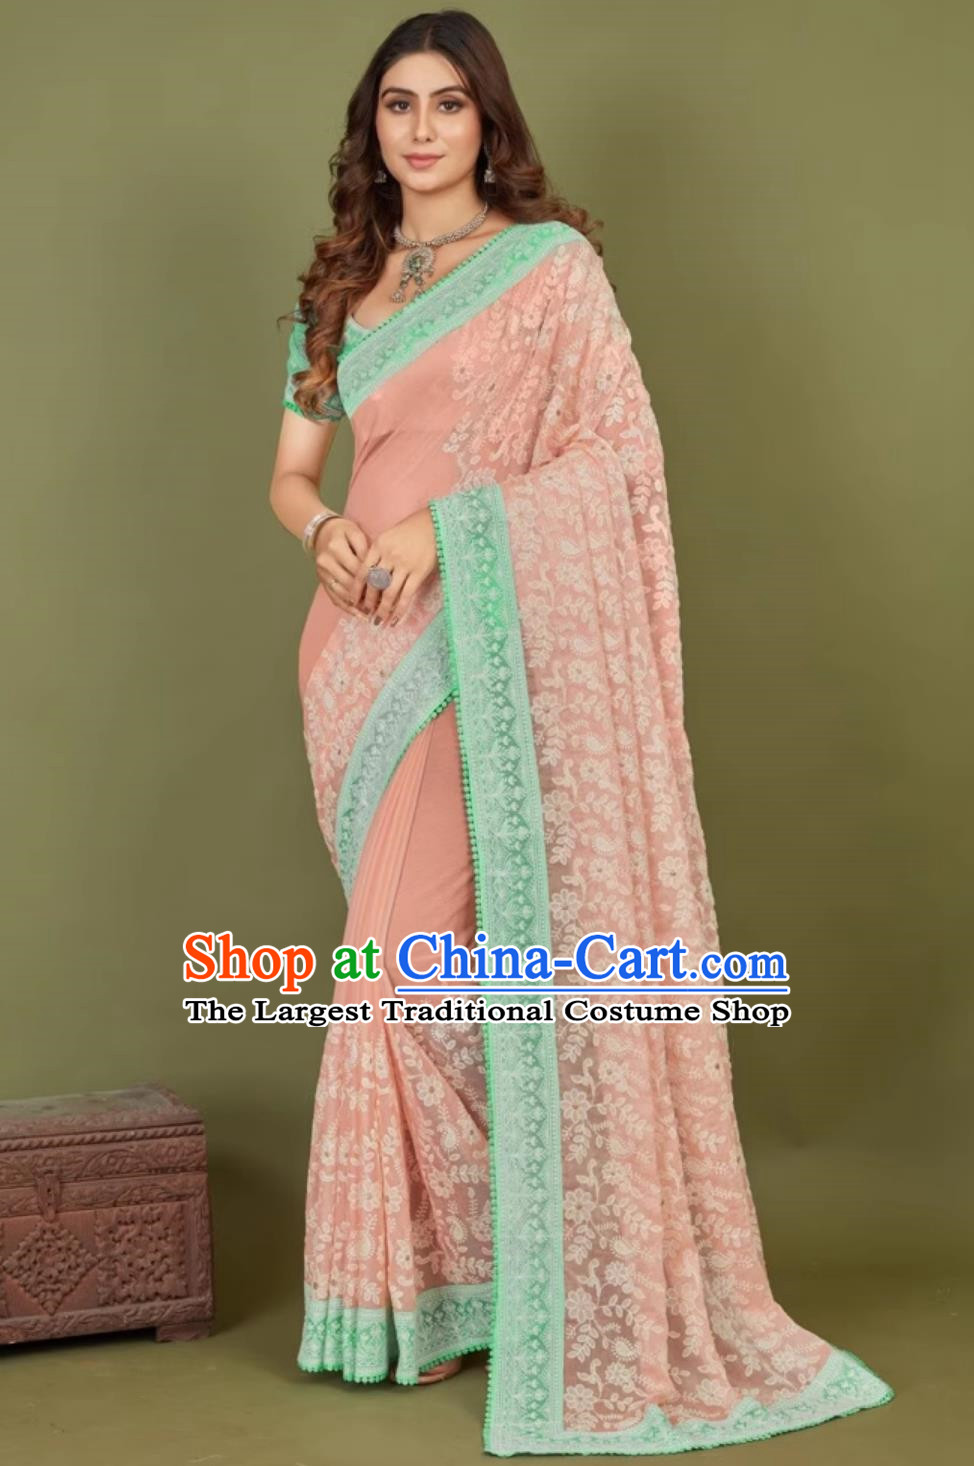 Traditional Festival Peach Pink Embroidered Sari Dress India Woman Summer Costume Indian National Clothing